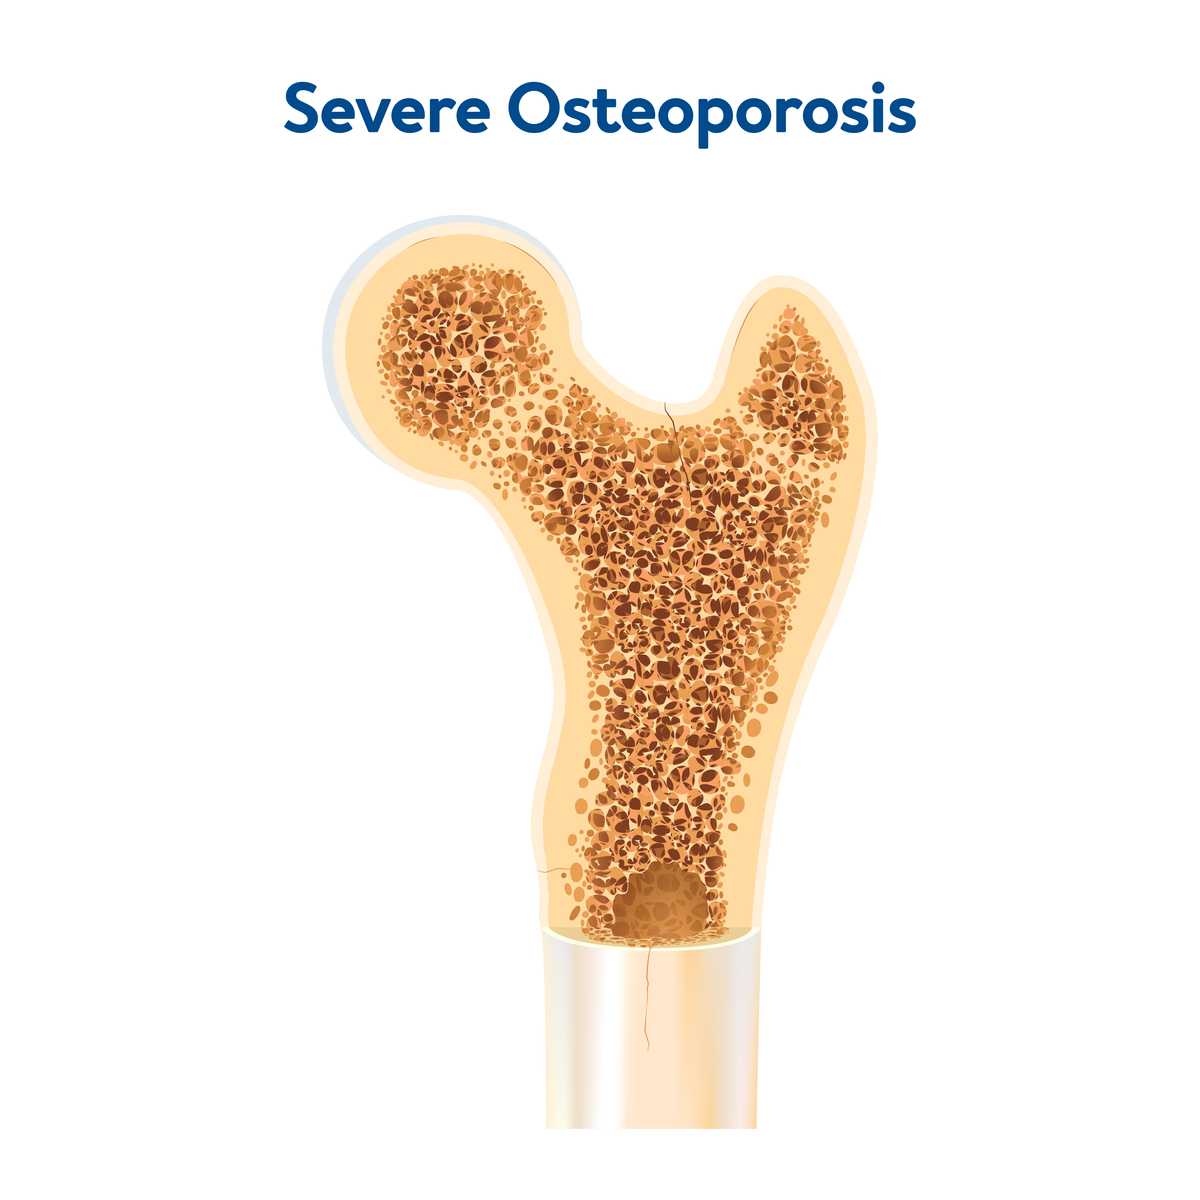 A graphic showing severe osteoporosis bone density